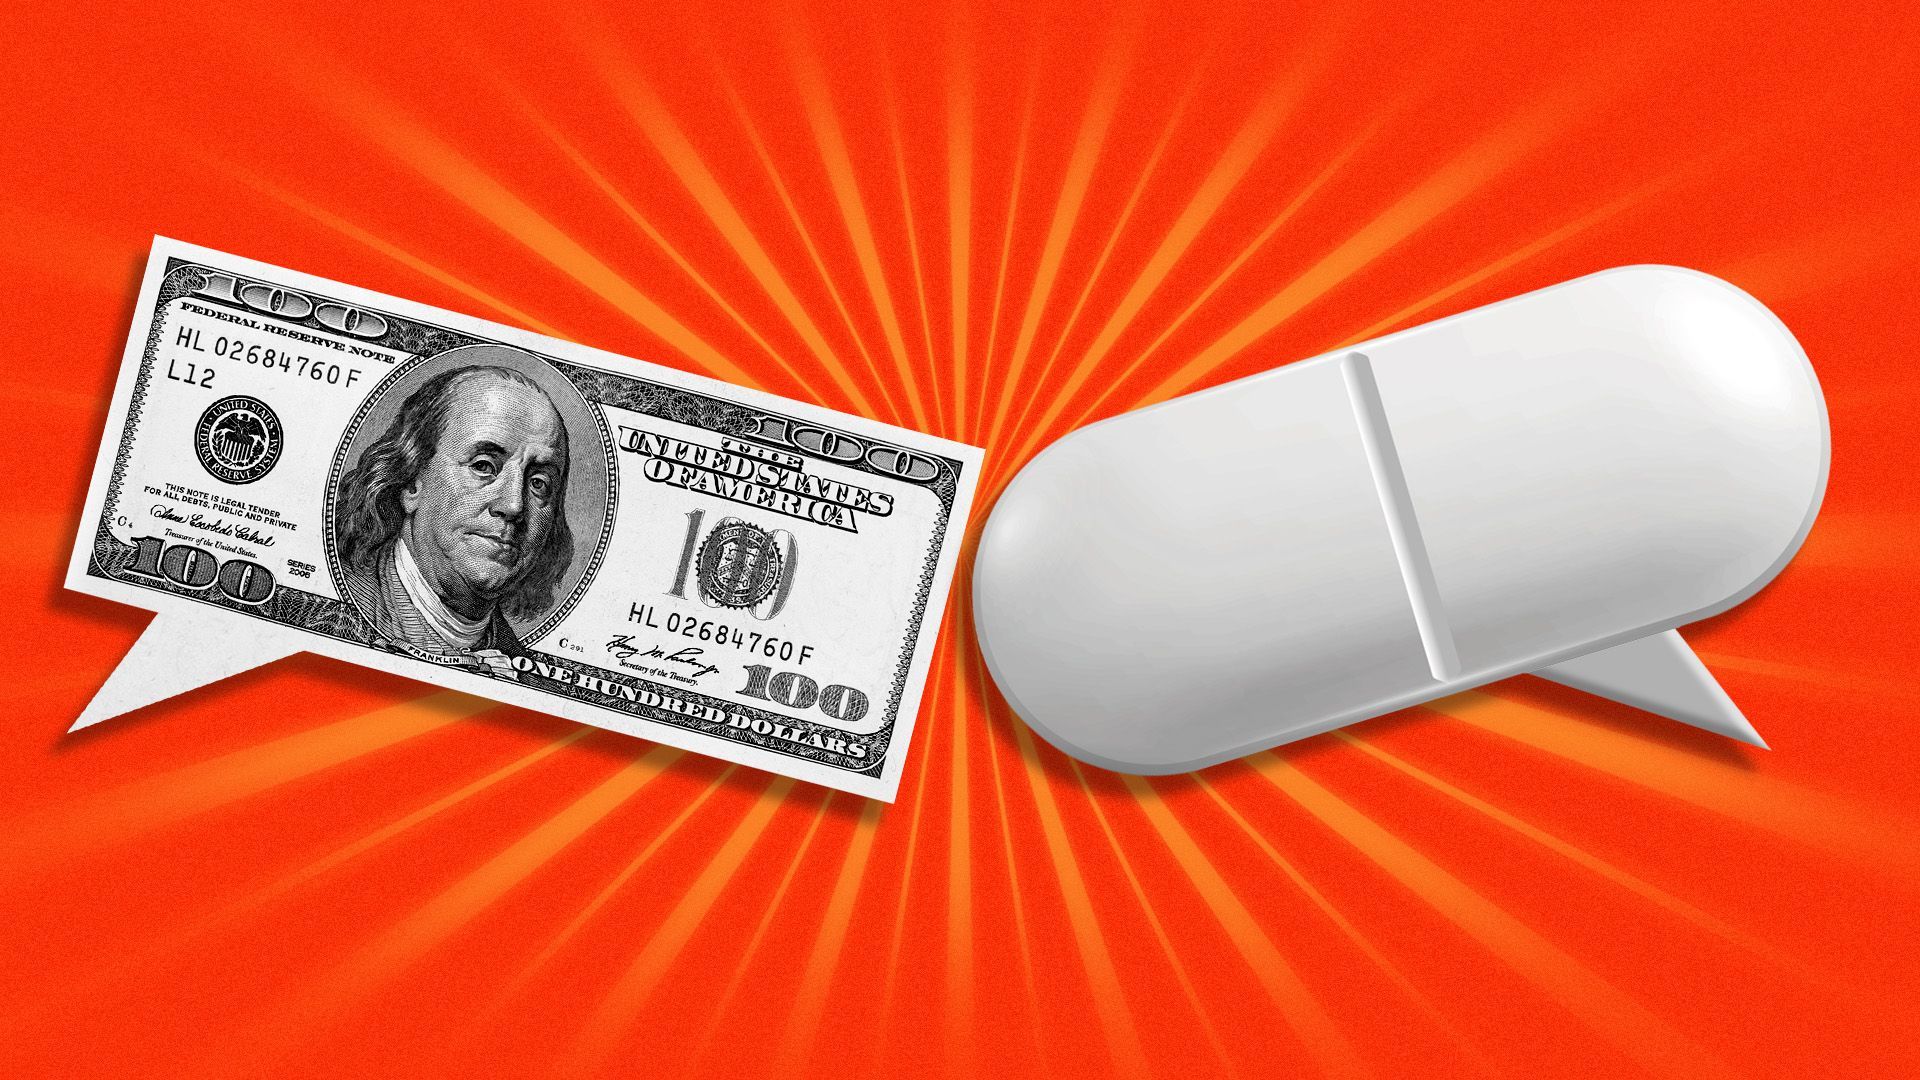 There is a new most expensive drug in the world. Price tag: $4.25 million